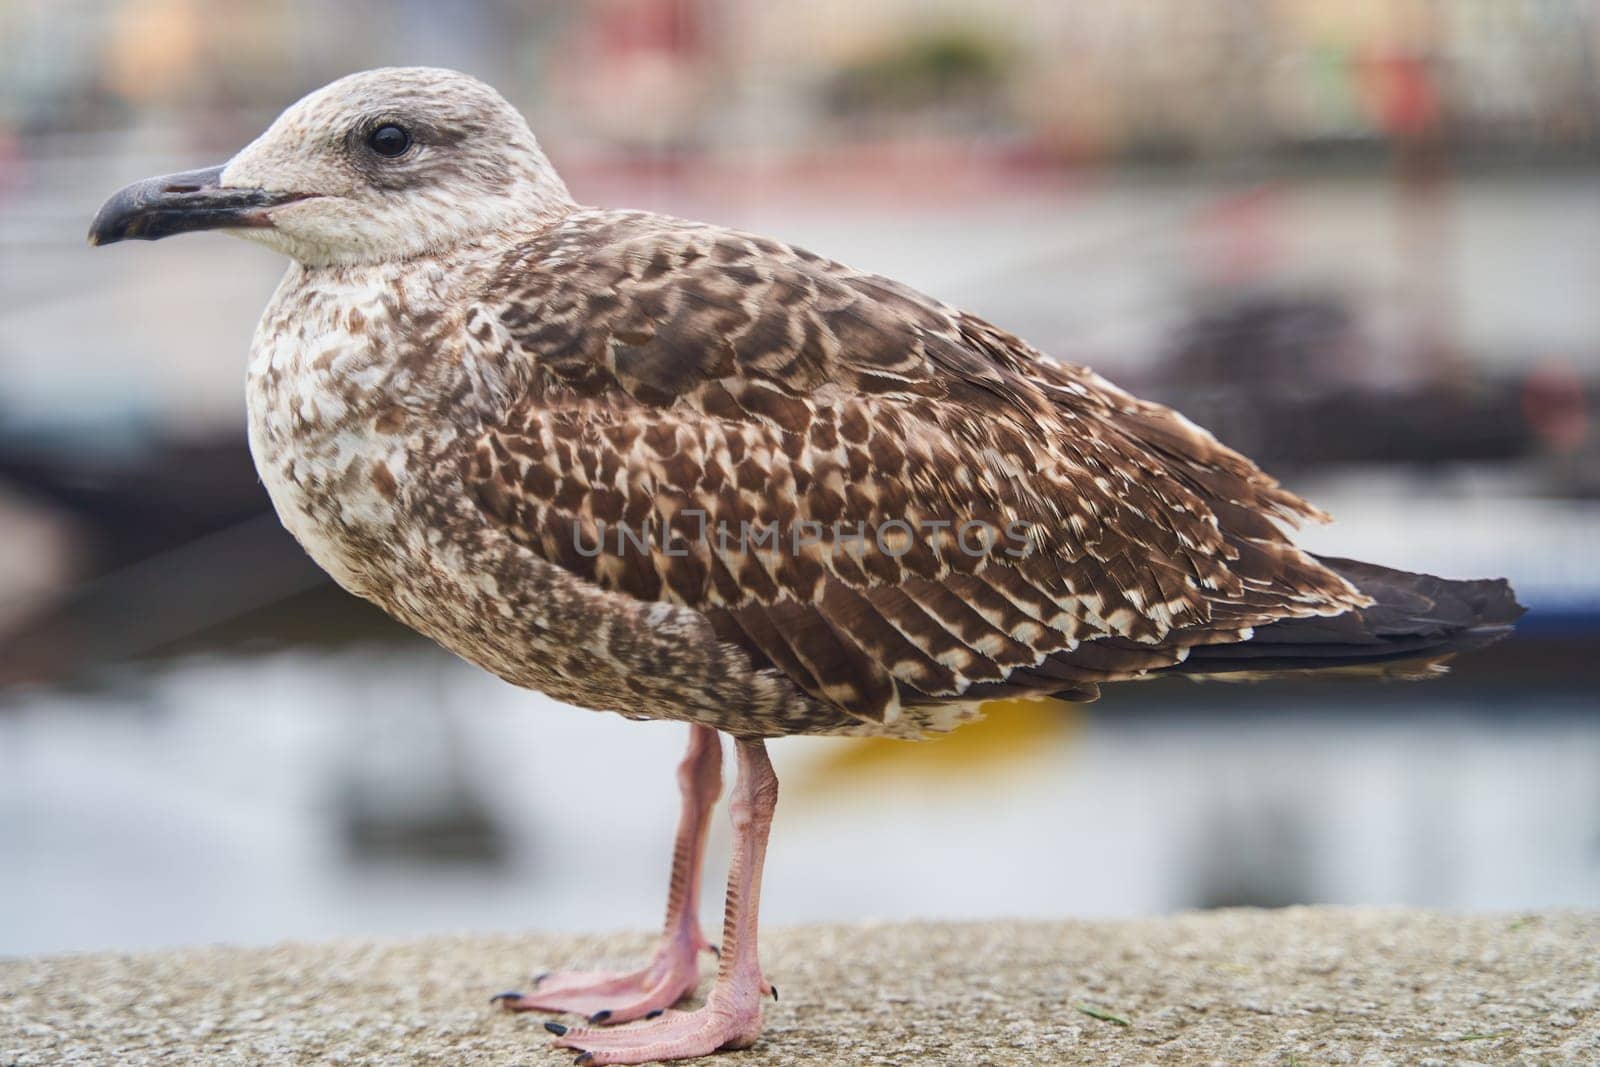 A European herring gull, a seabird of the Charadriiformes order, stands on a concrete wall with a boat in the background, showcasing its adaptation for balancing near water using its beak